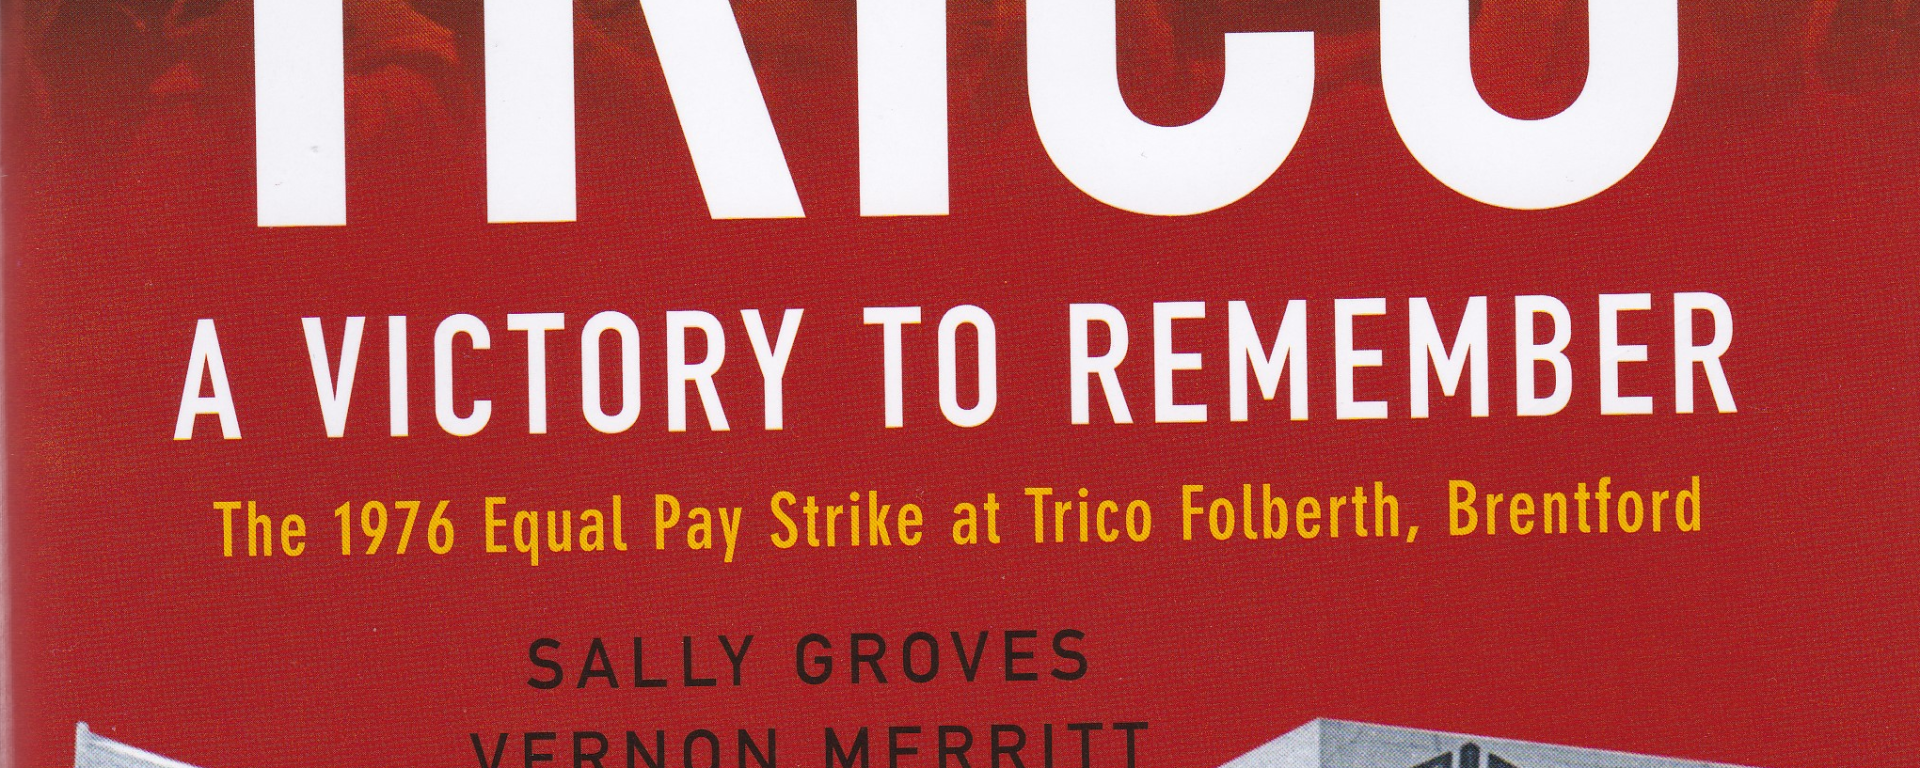 Trico: A Victory to Remember - book front cover